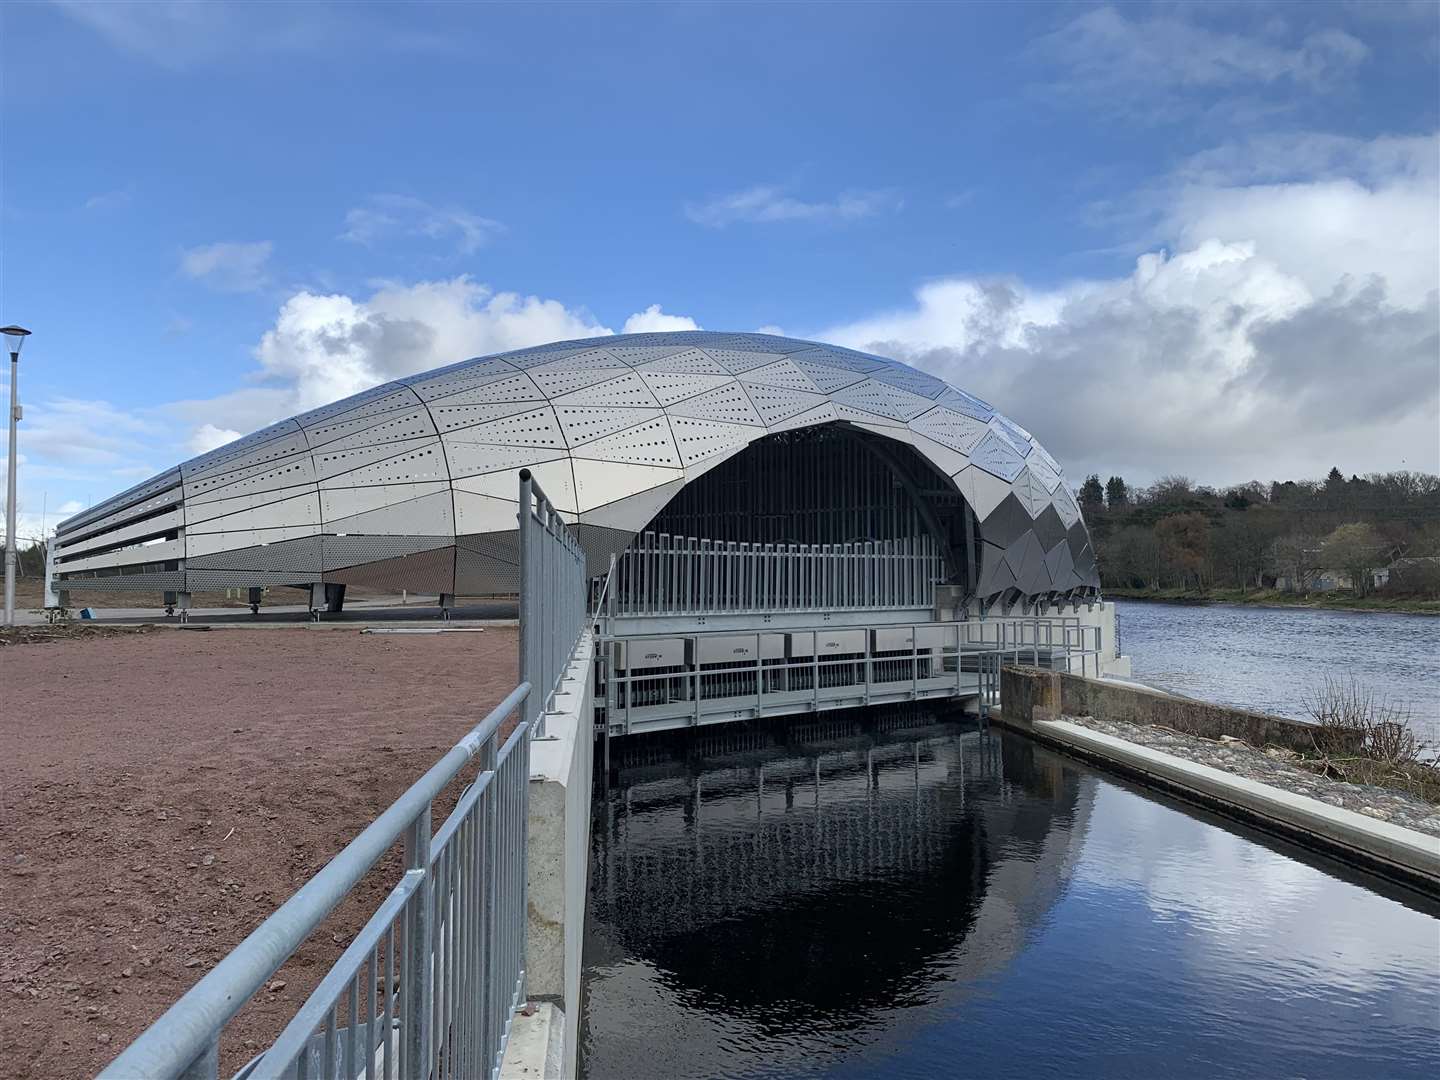 Hydro Ness generates and supplies over 500,000 kwh of green electricity annually to nearby Inverness Leisure.